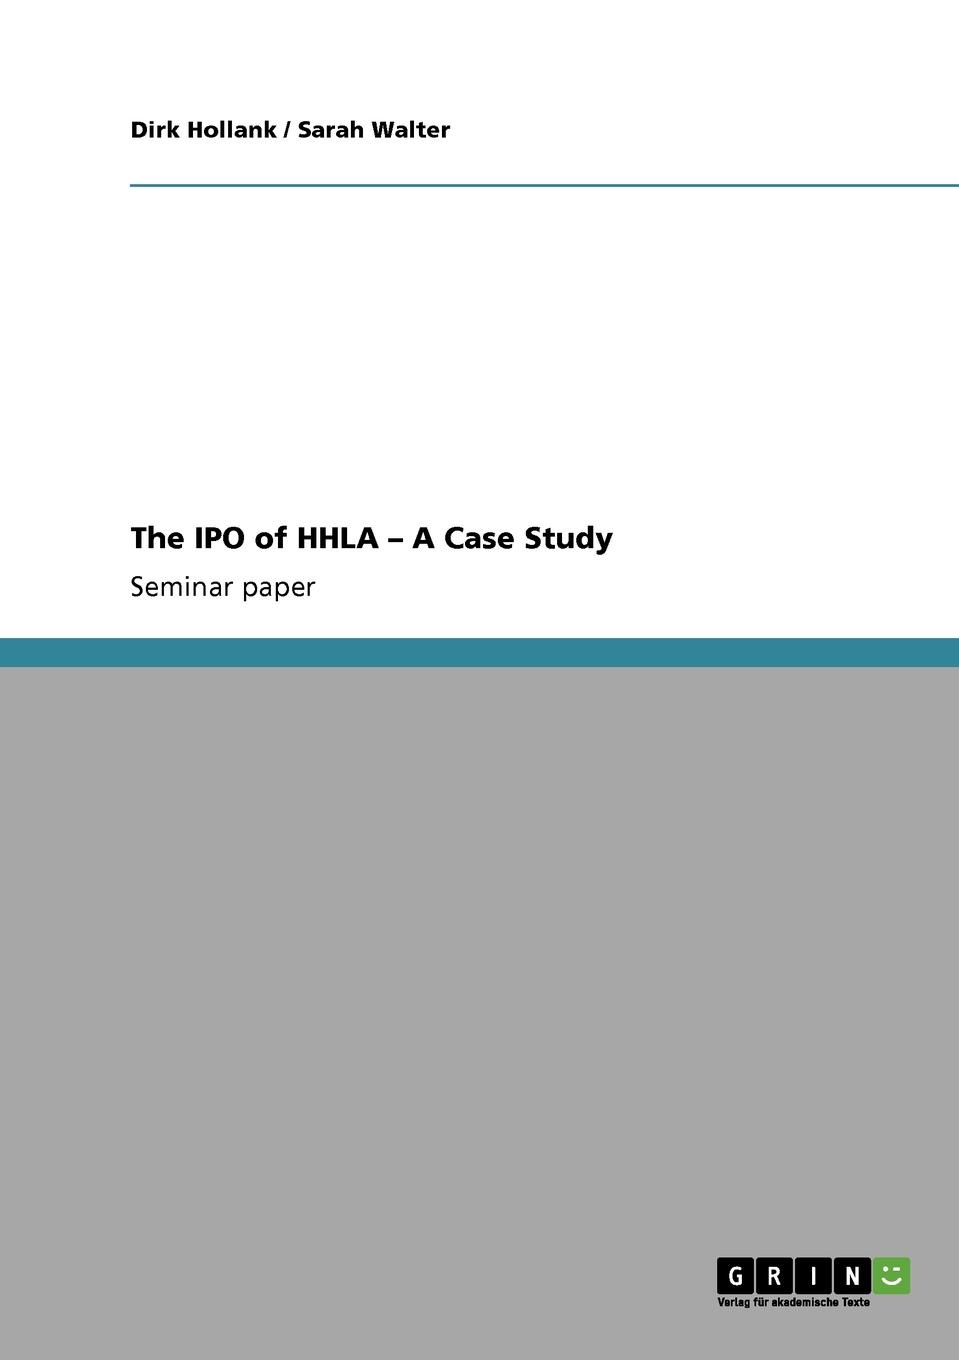 The IPO of HHLA - A Case Study